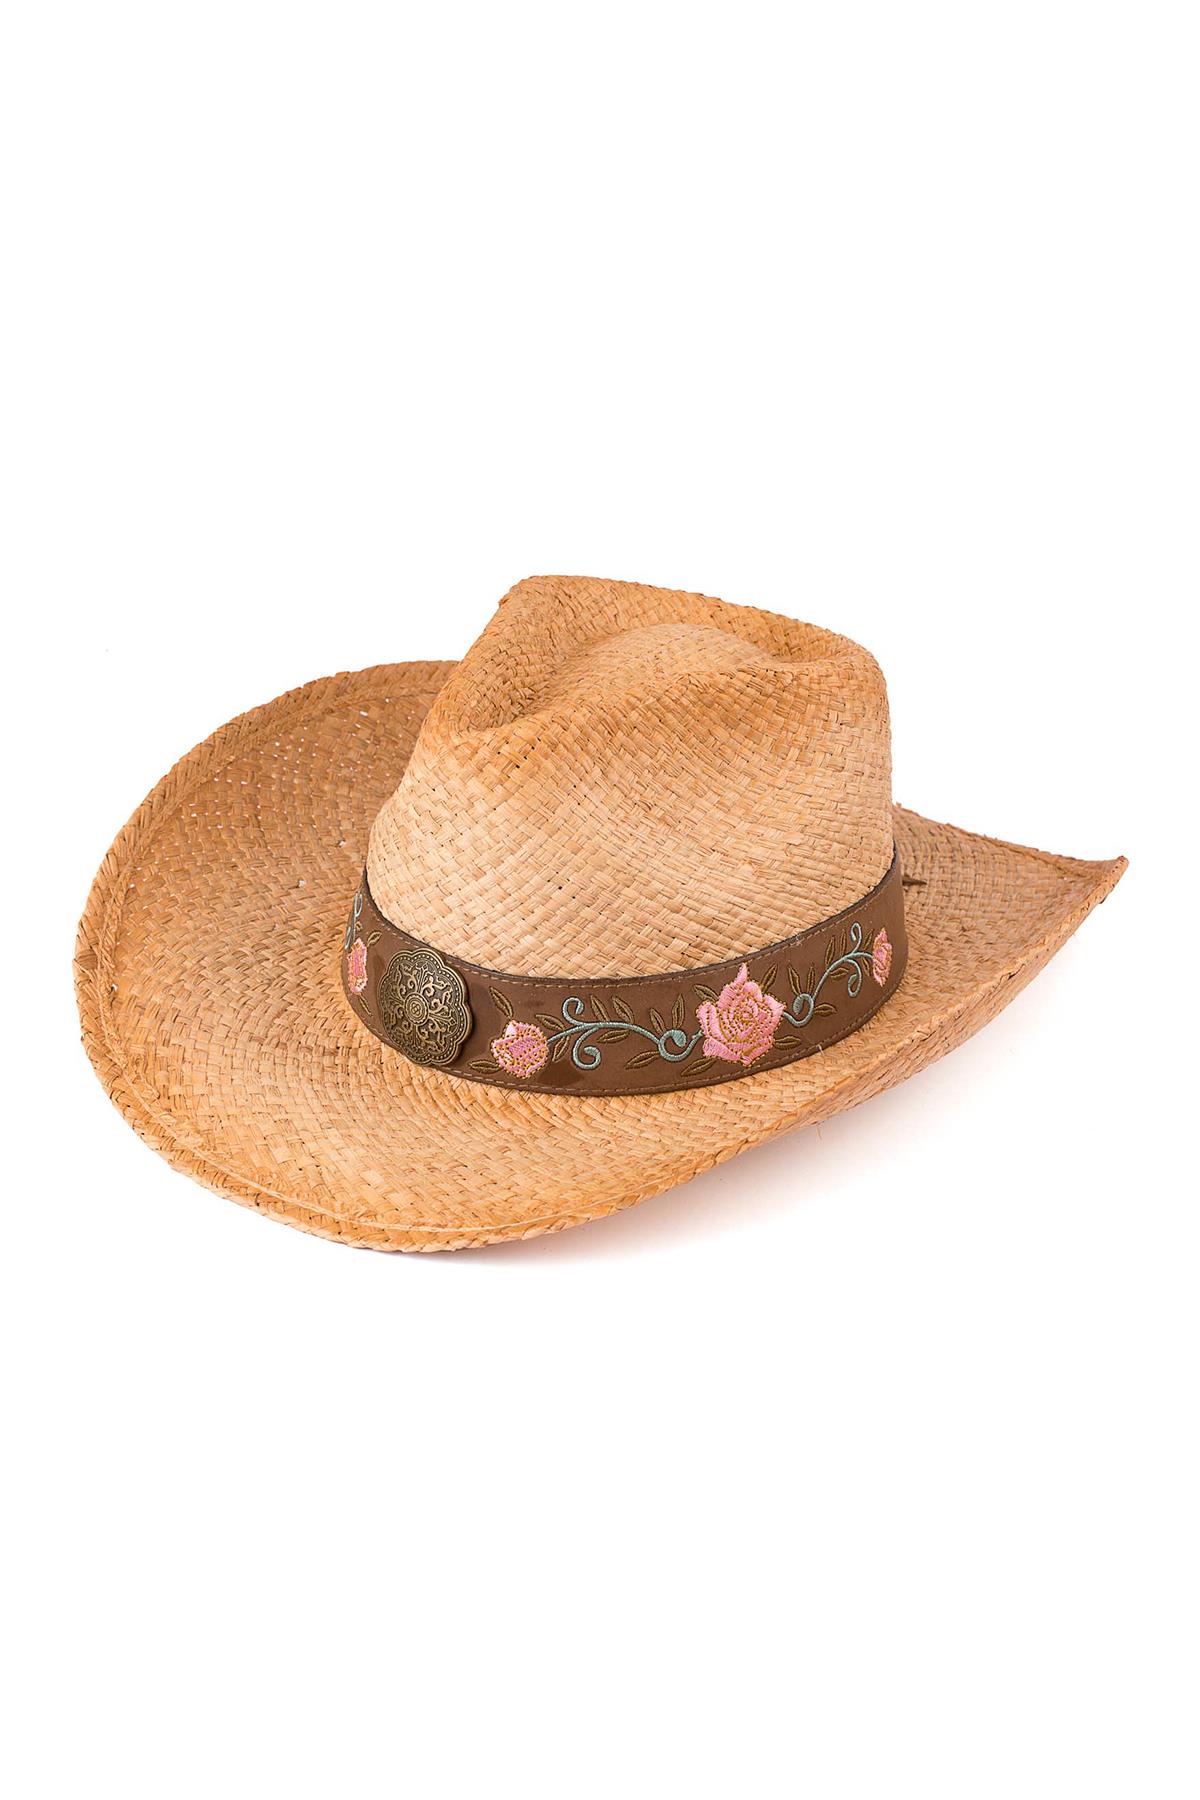 CC TEA STAINED RAFFIA COWBOY HAT WITH ROSE EMBELLISHMENT ON THE BAND TRIM